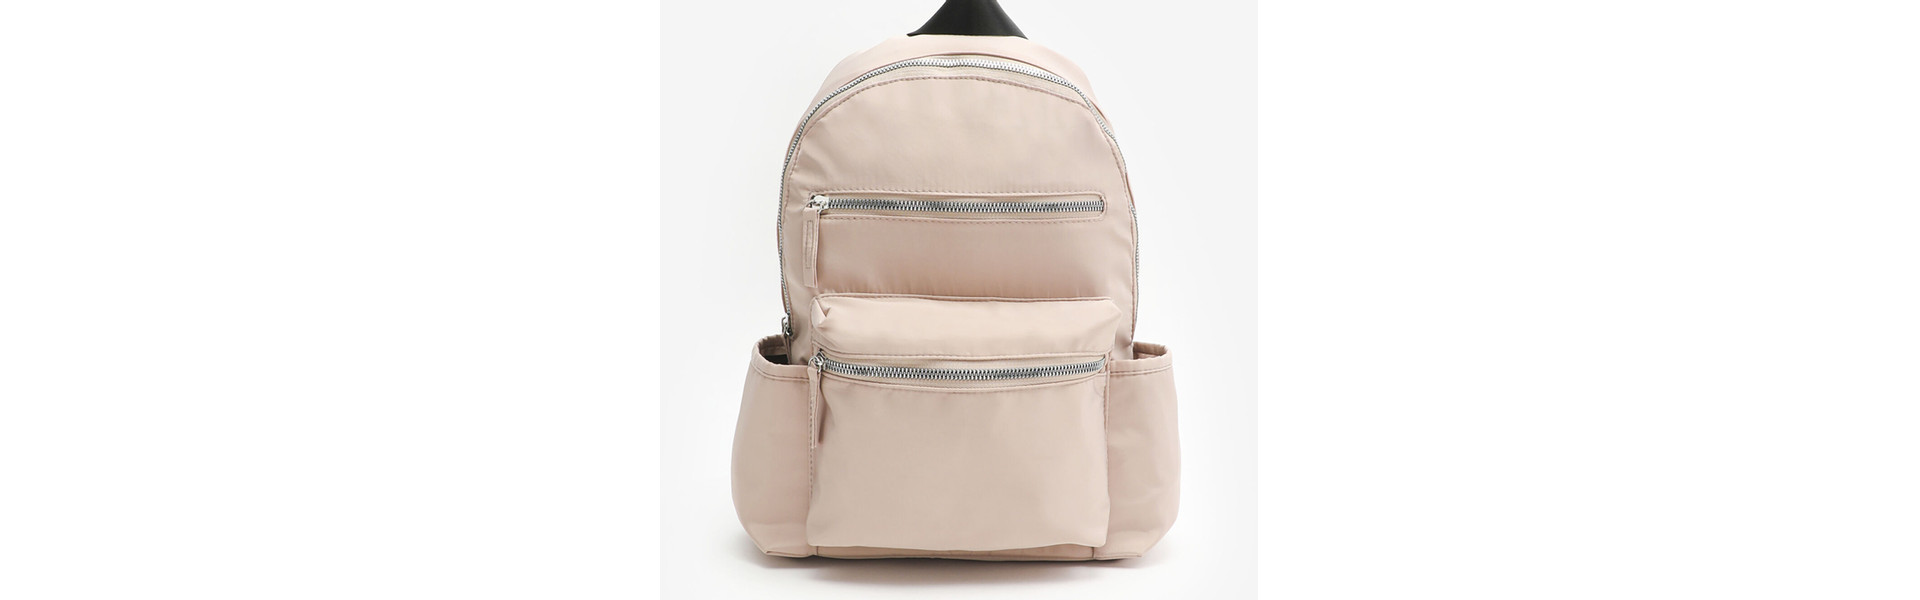 Nylon backpack with multiple pockets, $24.90 at Ardène